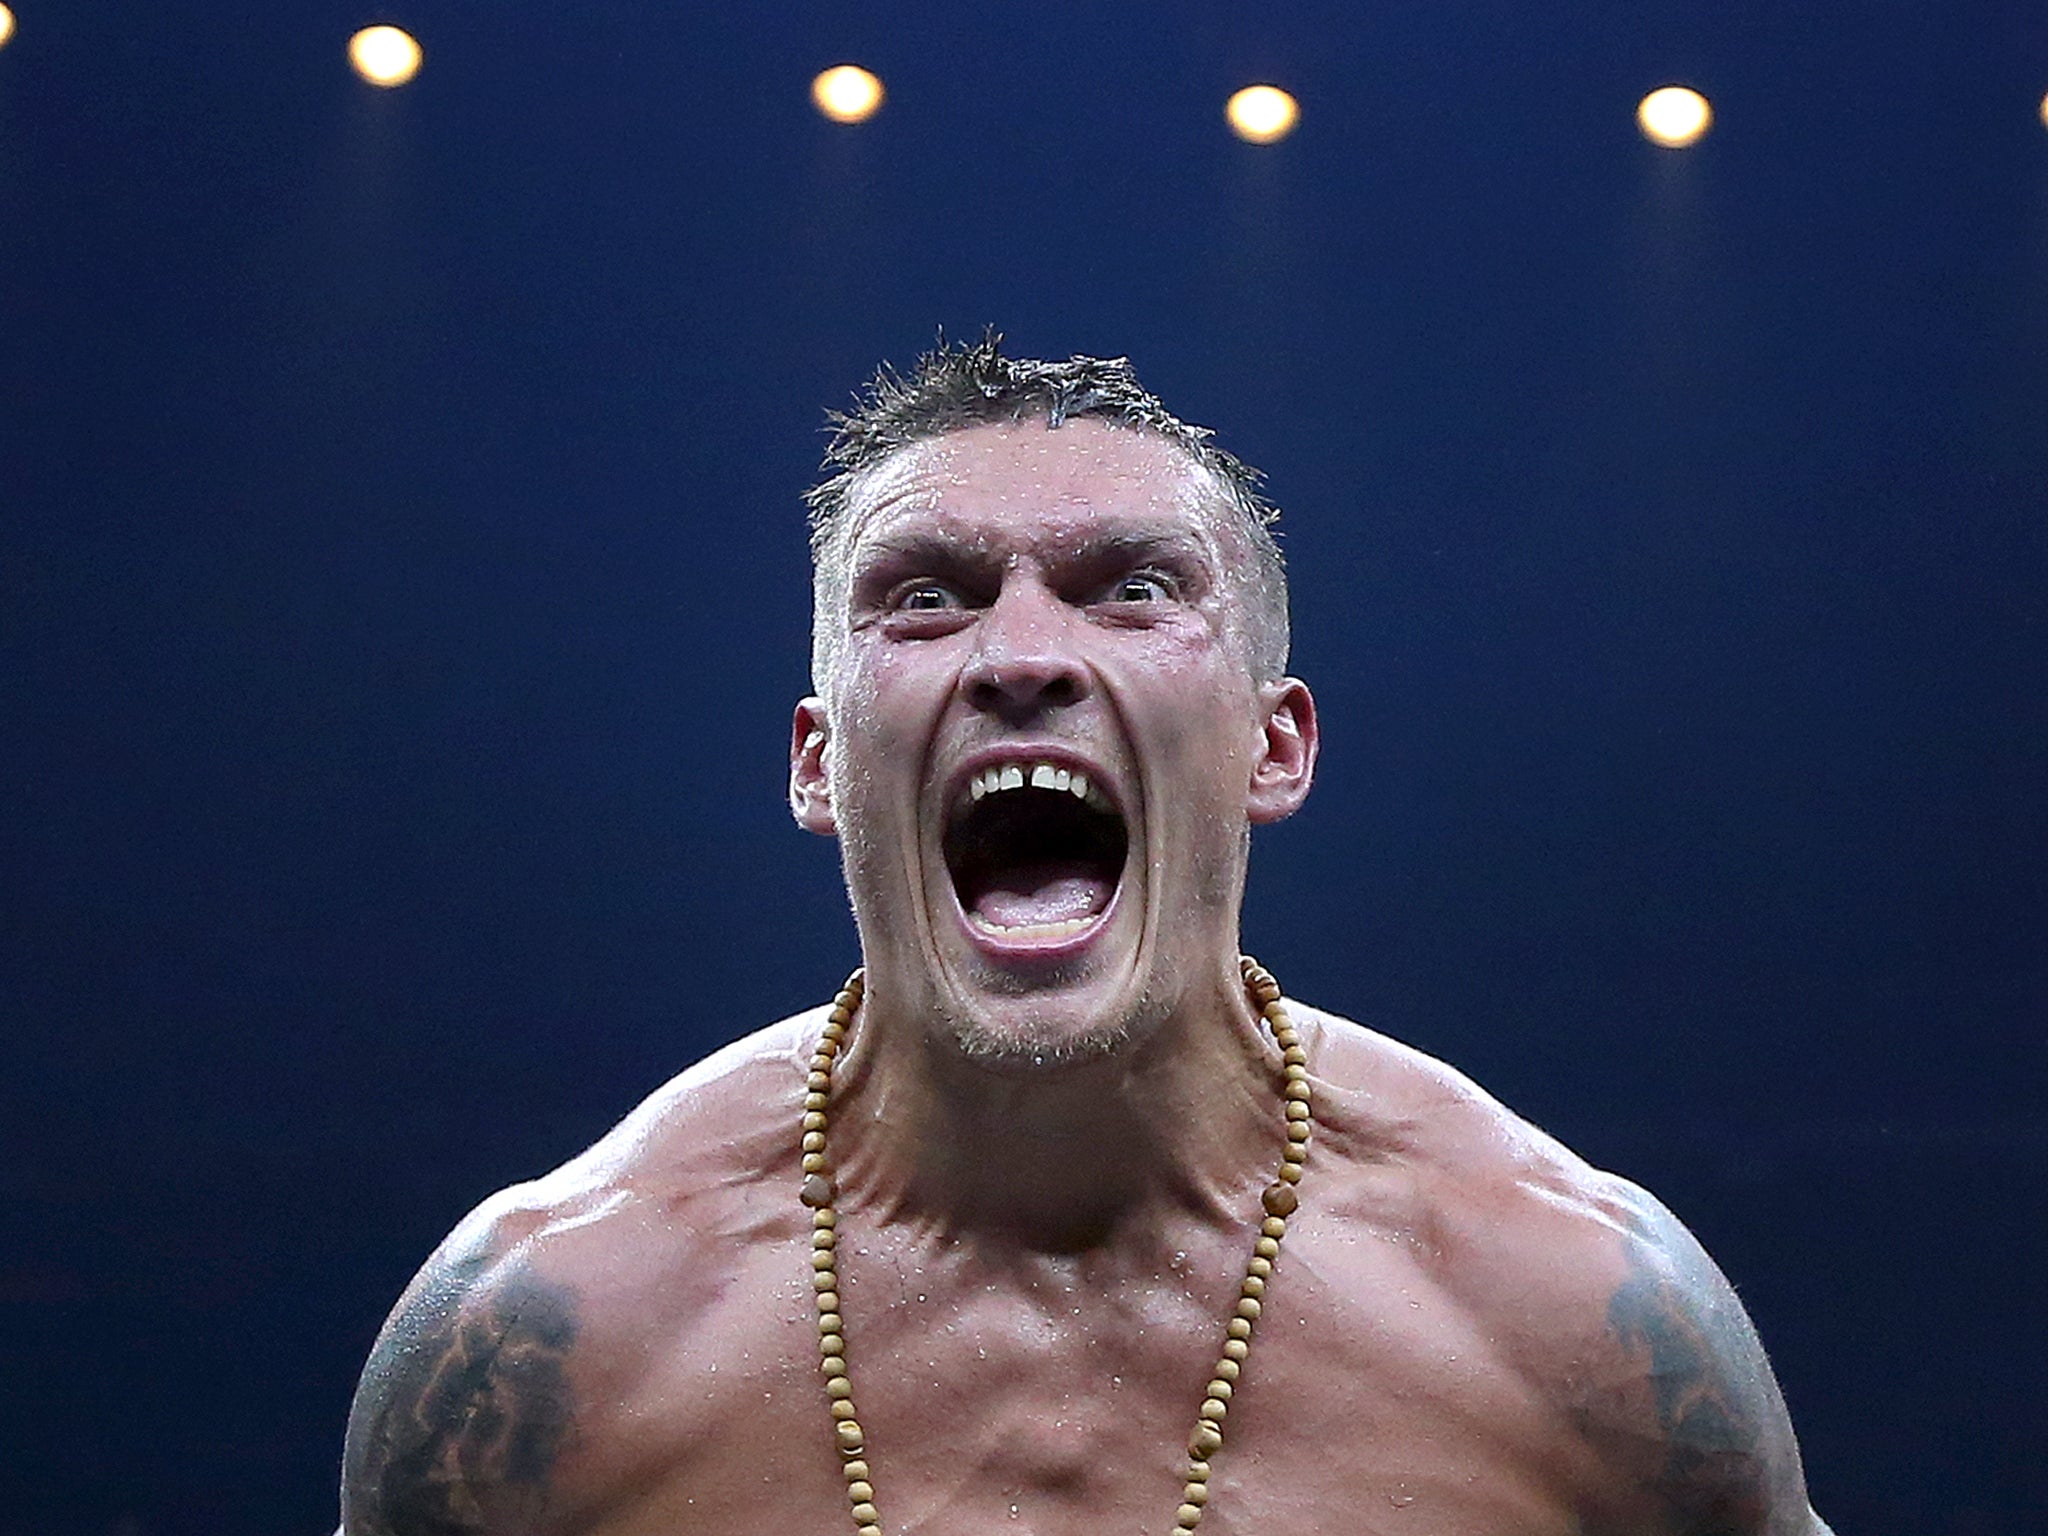 Oleksandr Usyk is one of four cruiserweight world champions who will compete in the World Boxing Super Series semi-finals